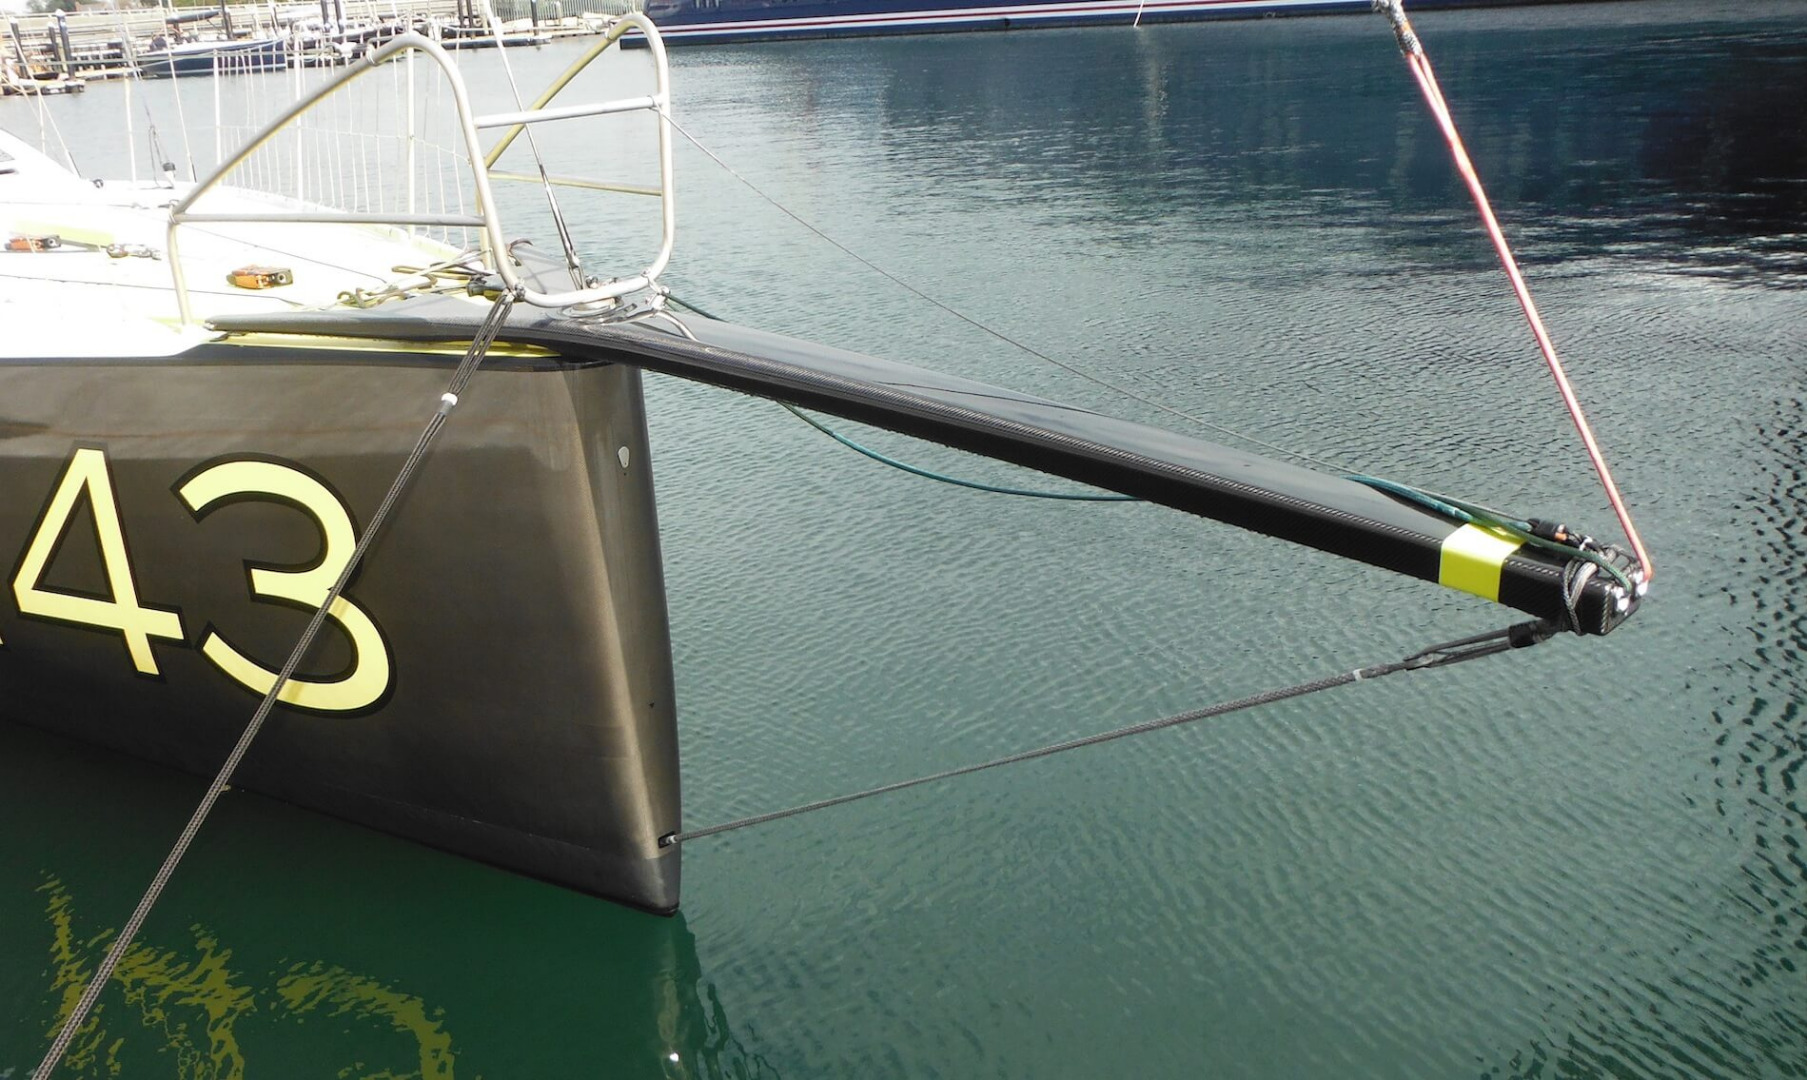 Owen Clarke’s involvement in grand prix racing yacht design has required us to specialise in the design and engineering of complex carbon and metal components. OC are particularly experienced in the design of deck hardware in all materials. OC have also produced a range of bowsprit types from 0.6m to 3m in length, including numerous rotating sprits for yachts between 6.5 and 18m.